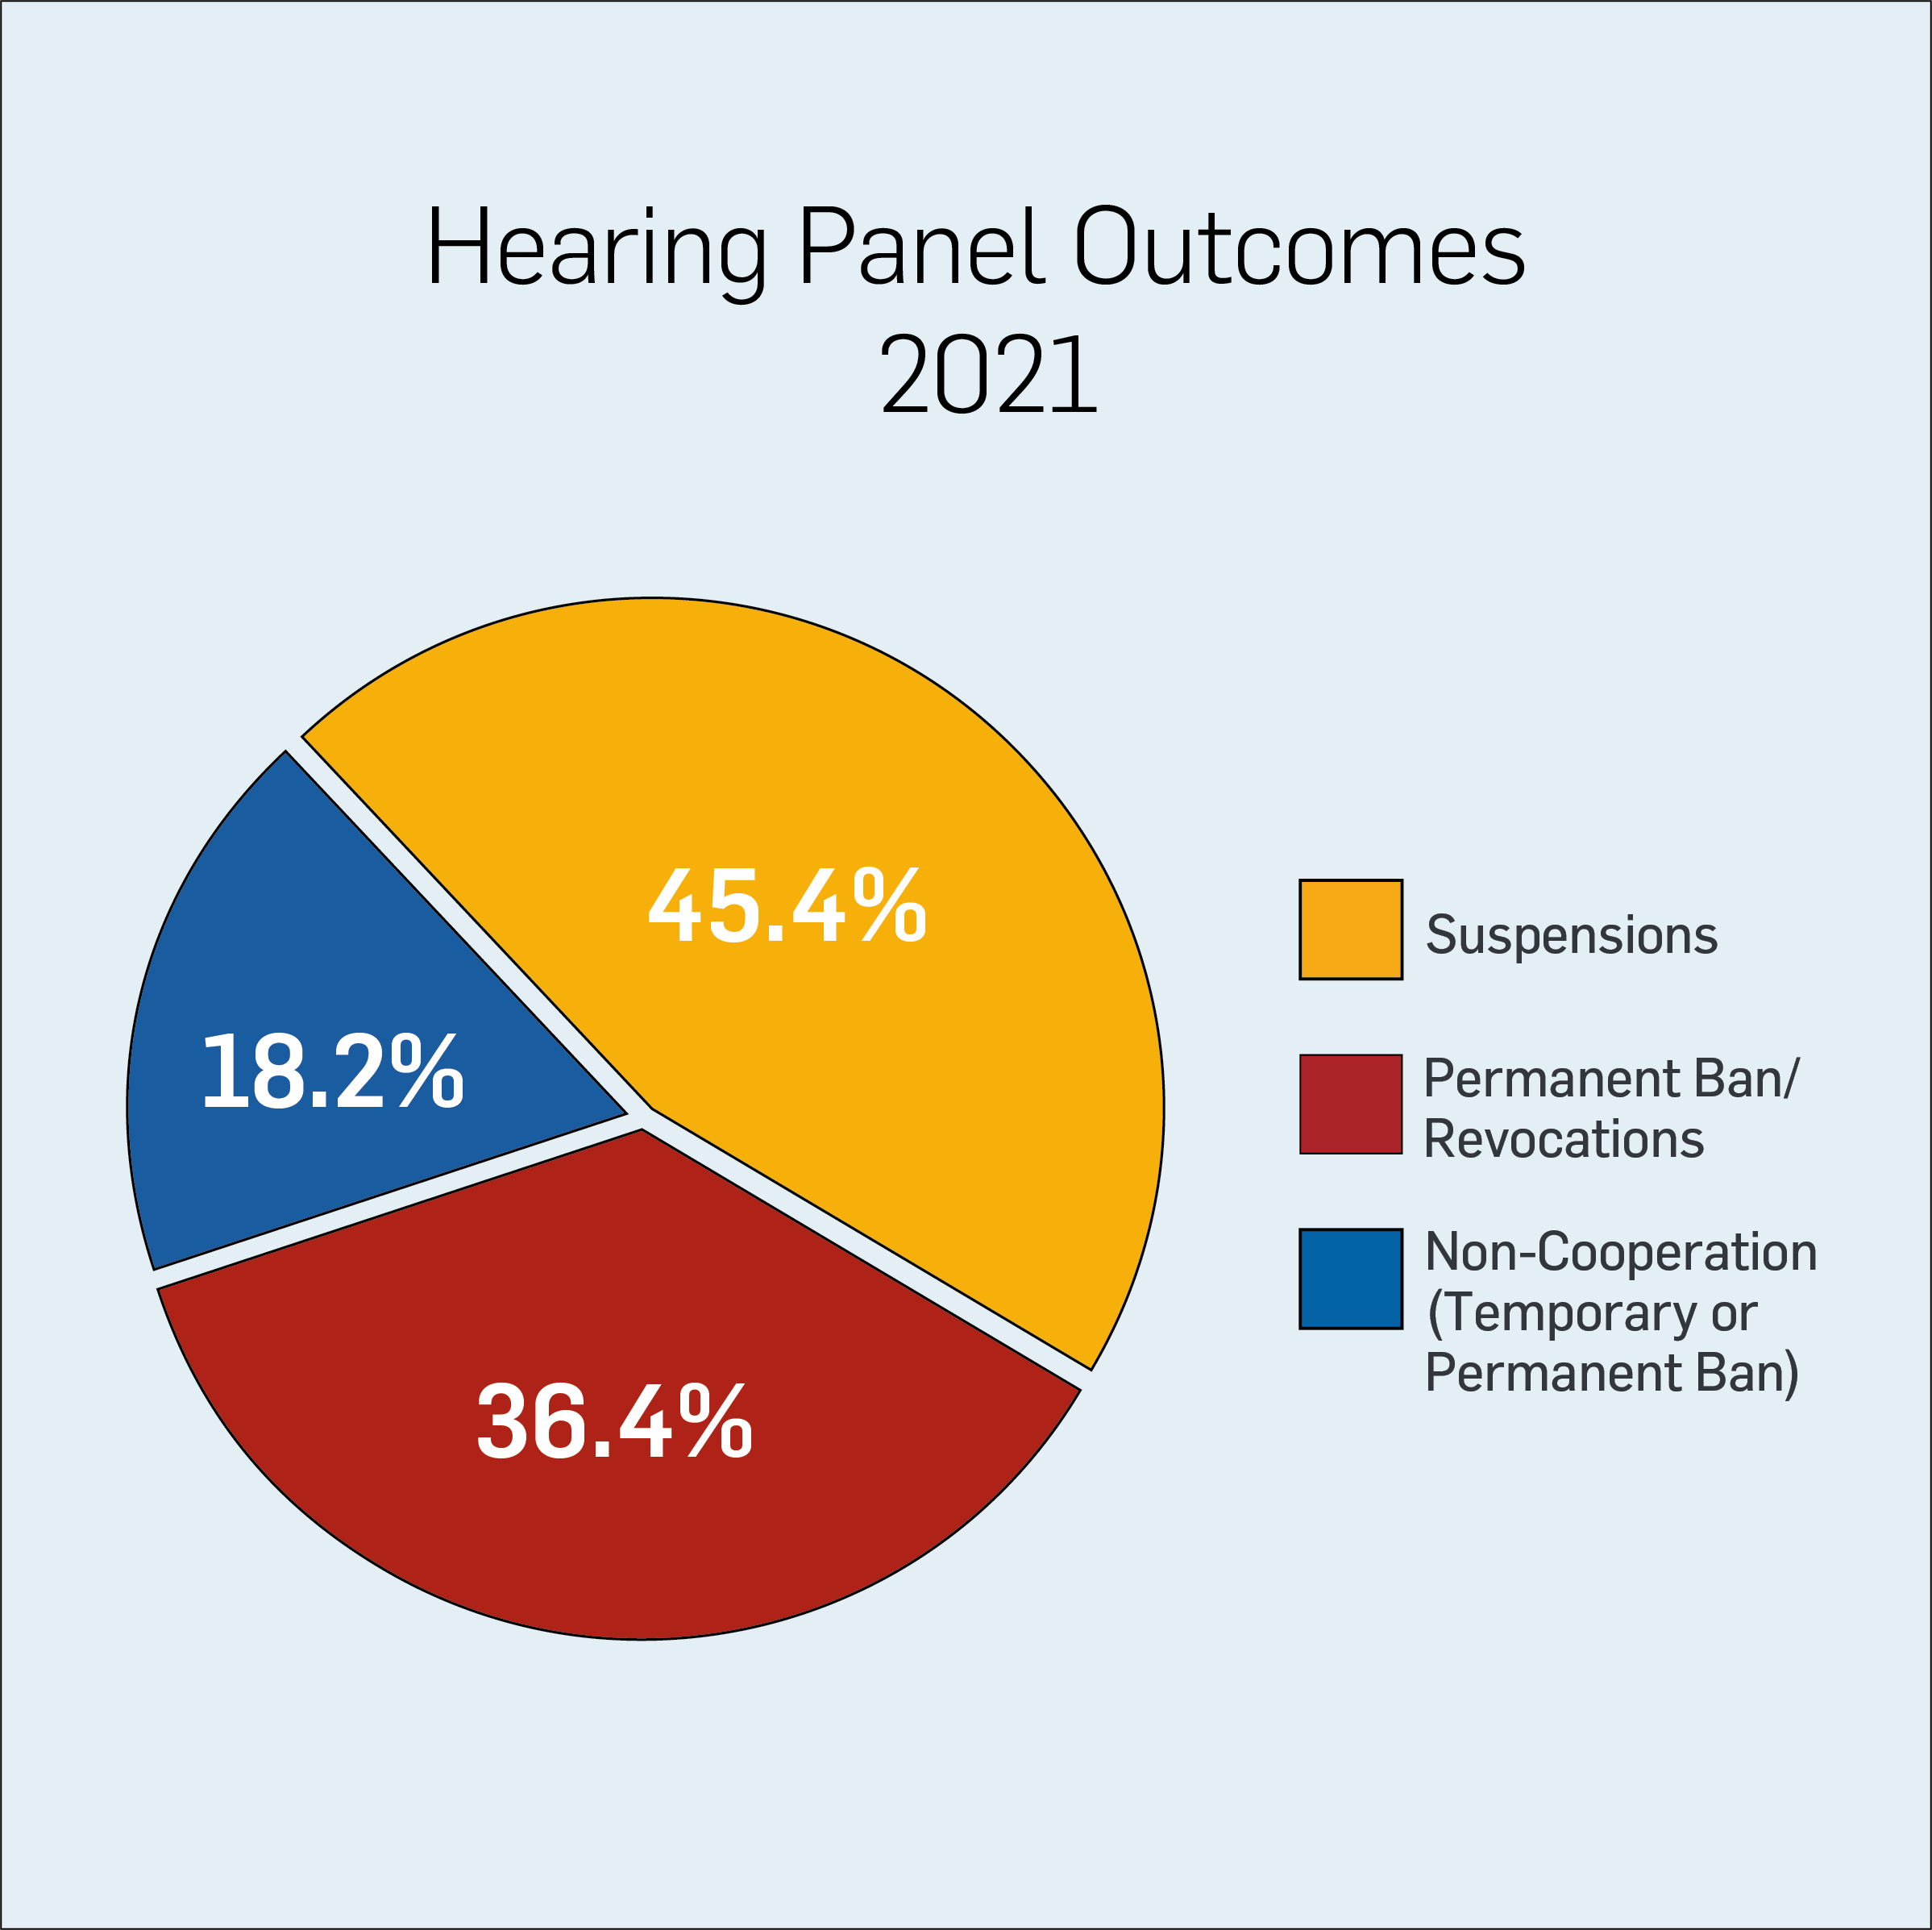 Infographic showing breakdown of Hearing Panel outcomes in 2021: 45.4% suspensions, 36.4% permanent bans or revocations, and 18.2% non-cooperation.